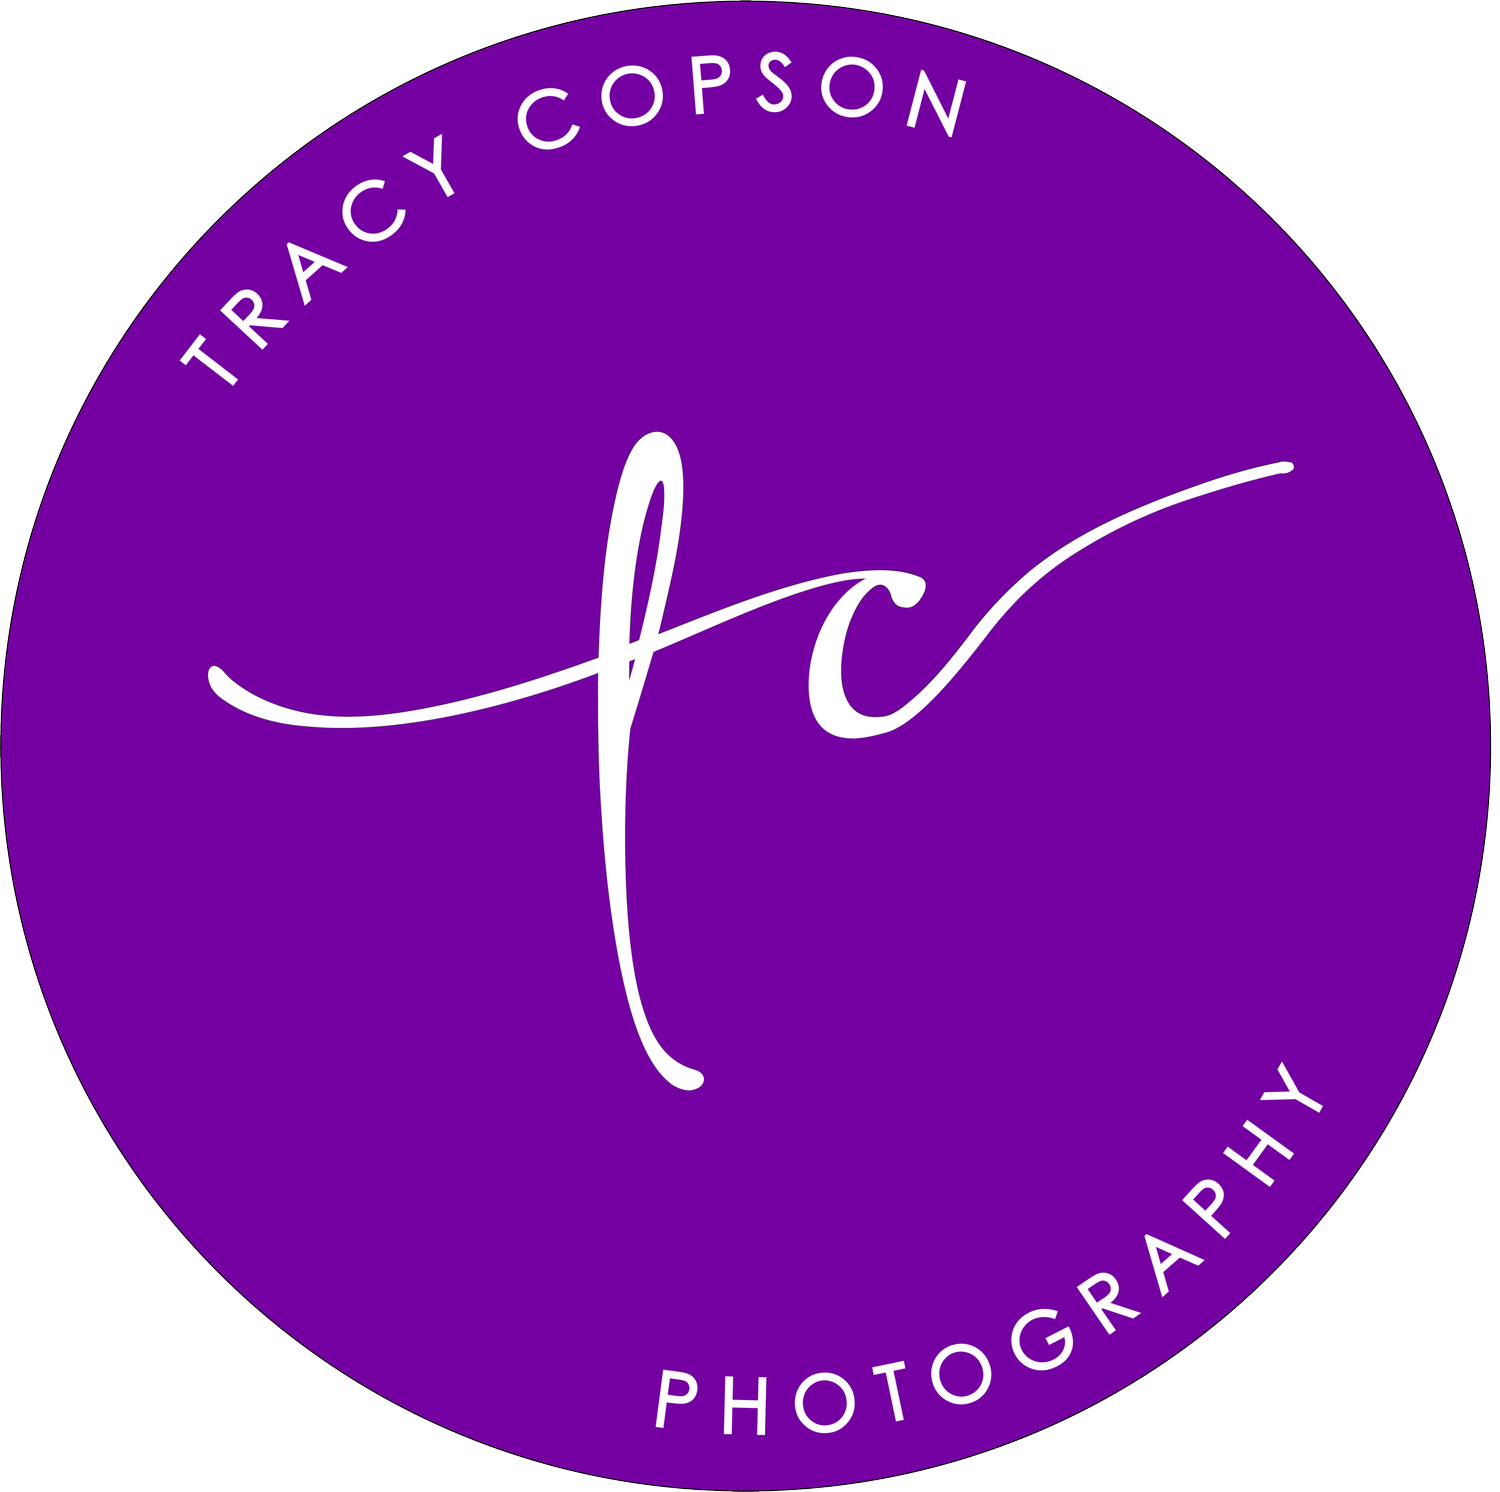 Tracy Copson Photography